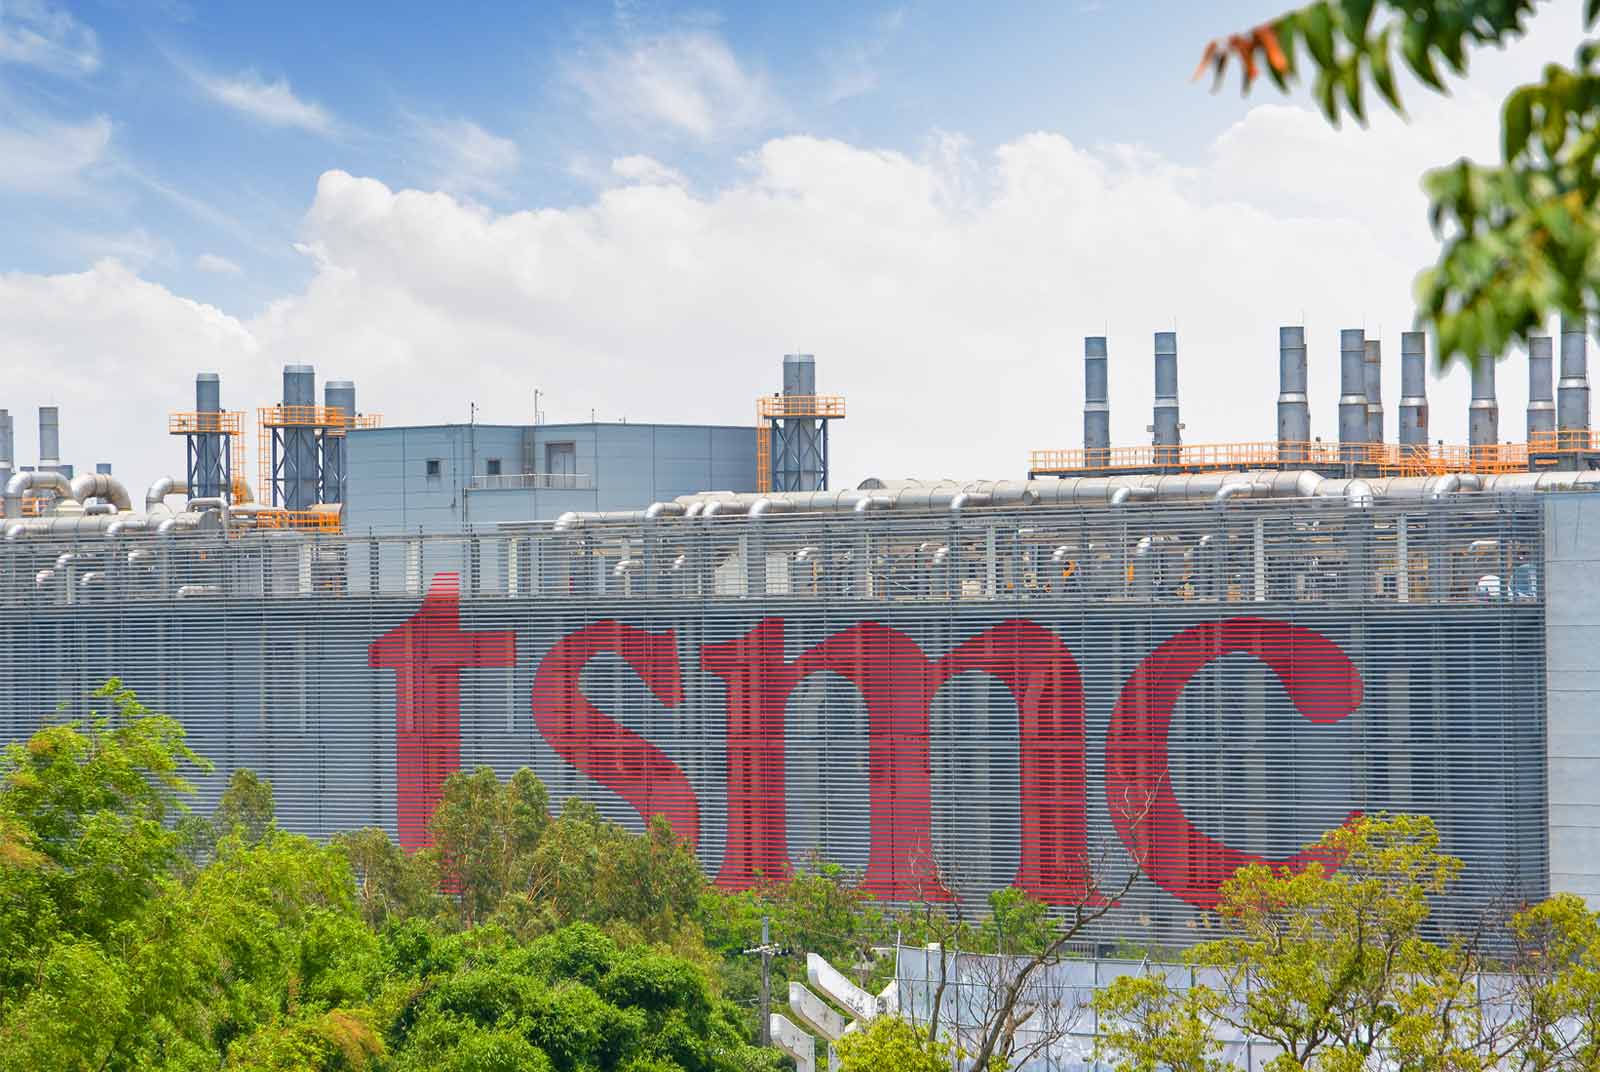 TSMC in Japan is significant for business and human rights in Taiwan